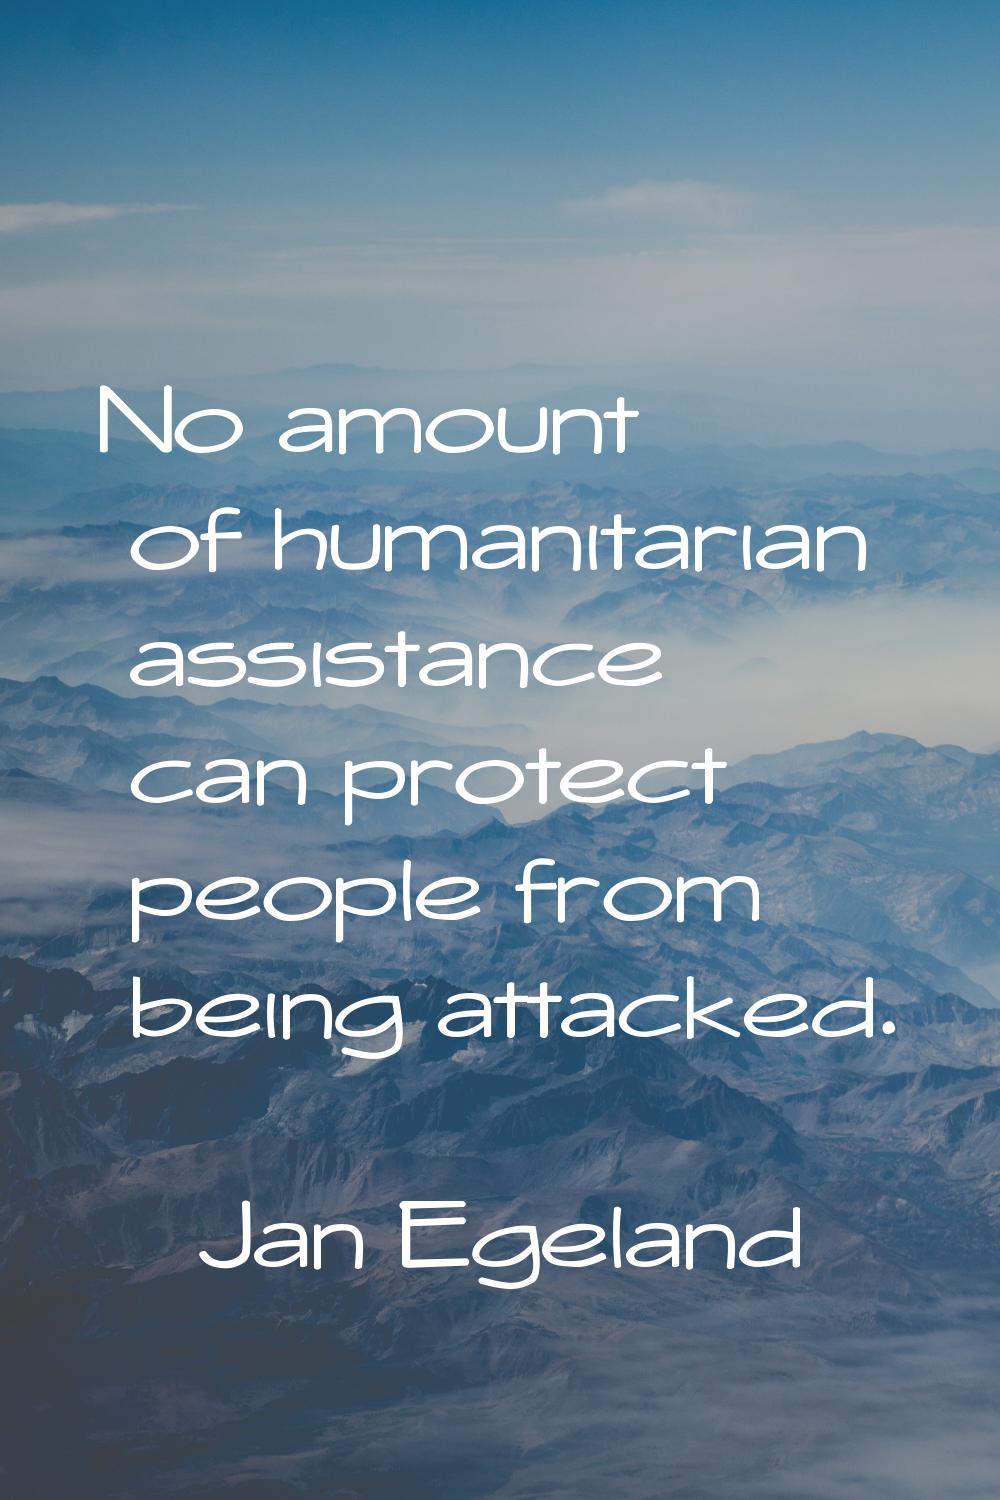 No amount of humanitarian assistance can protect people from being attacked.